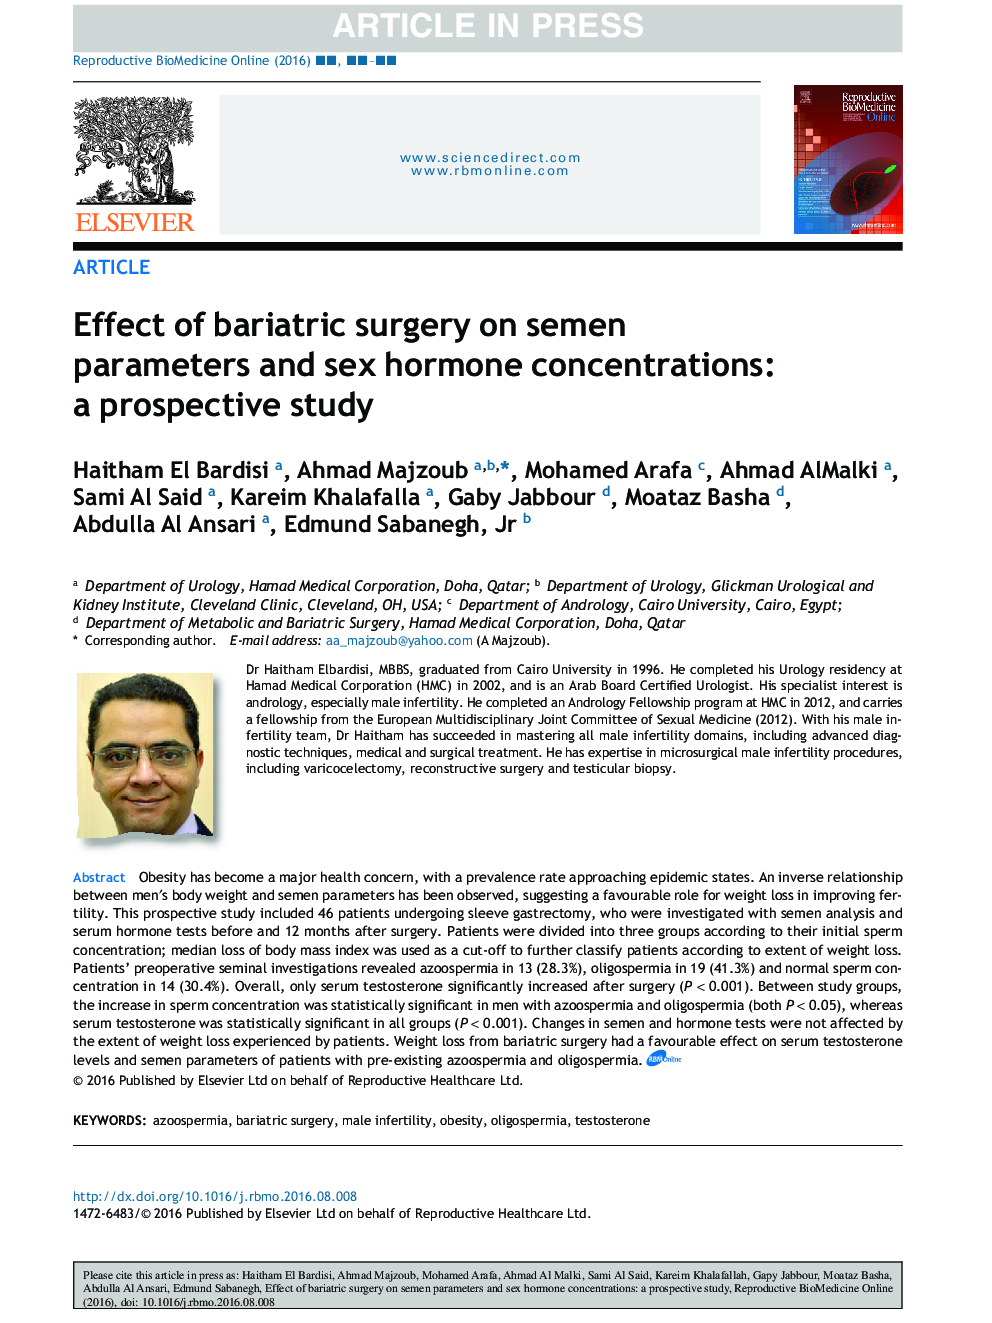 Effect of bariatric surgery on semen parameters and sex hormone concentrations: a prospective study